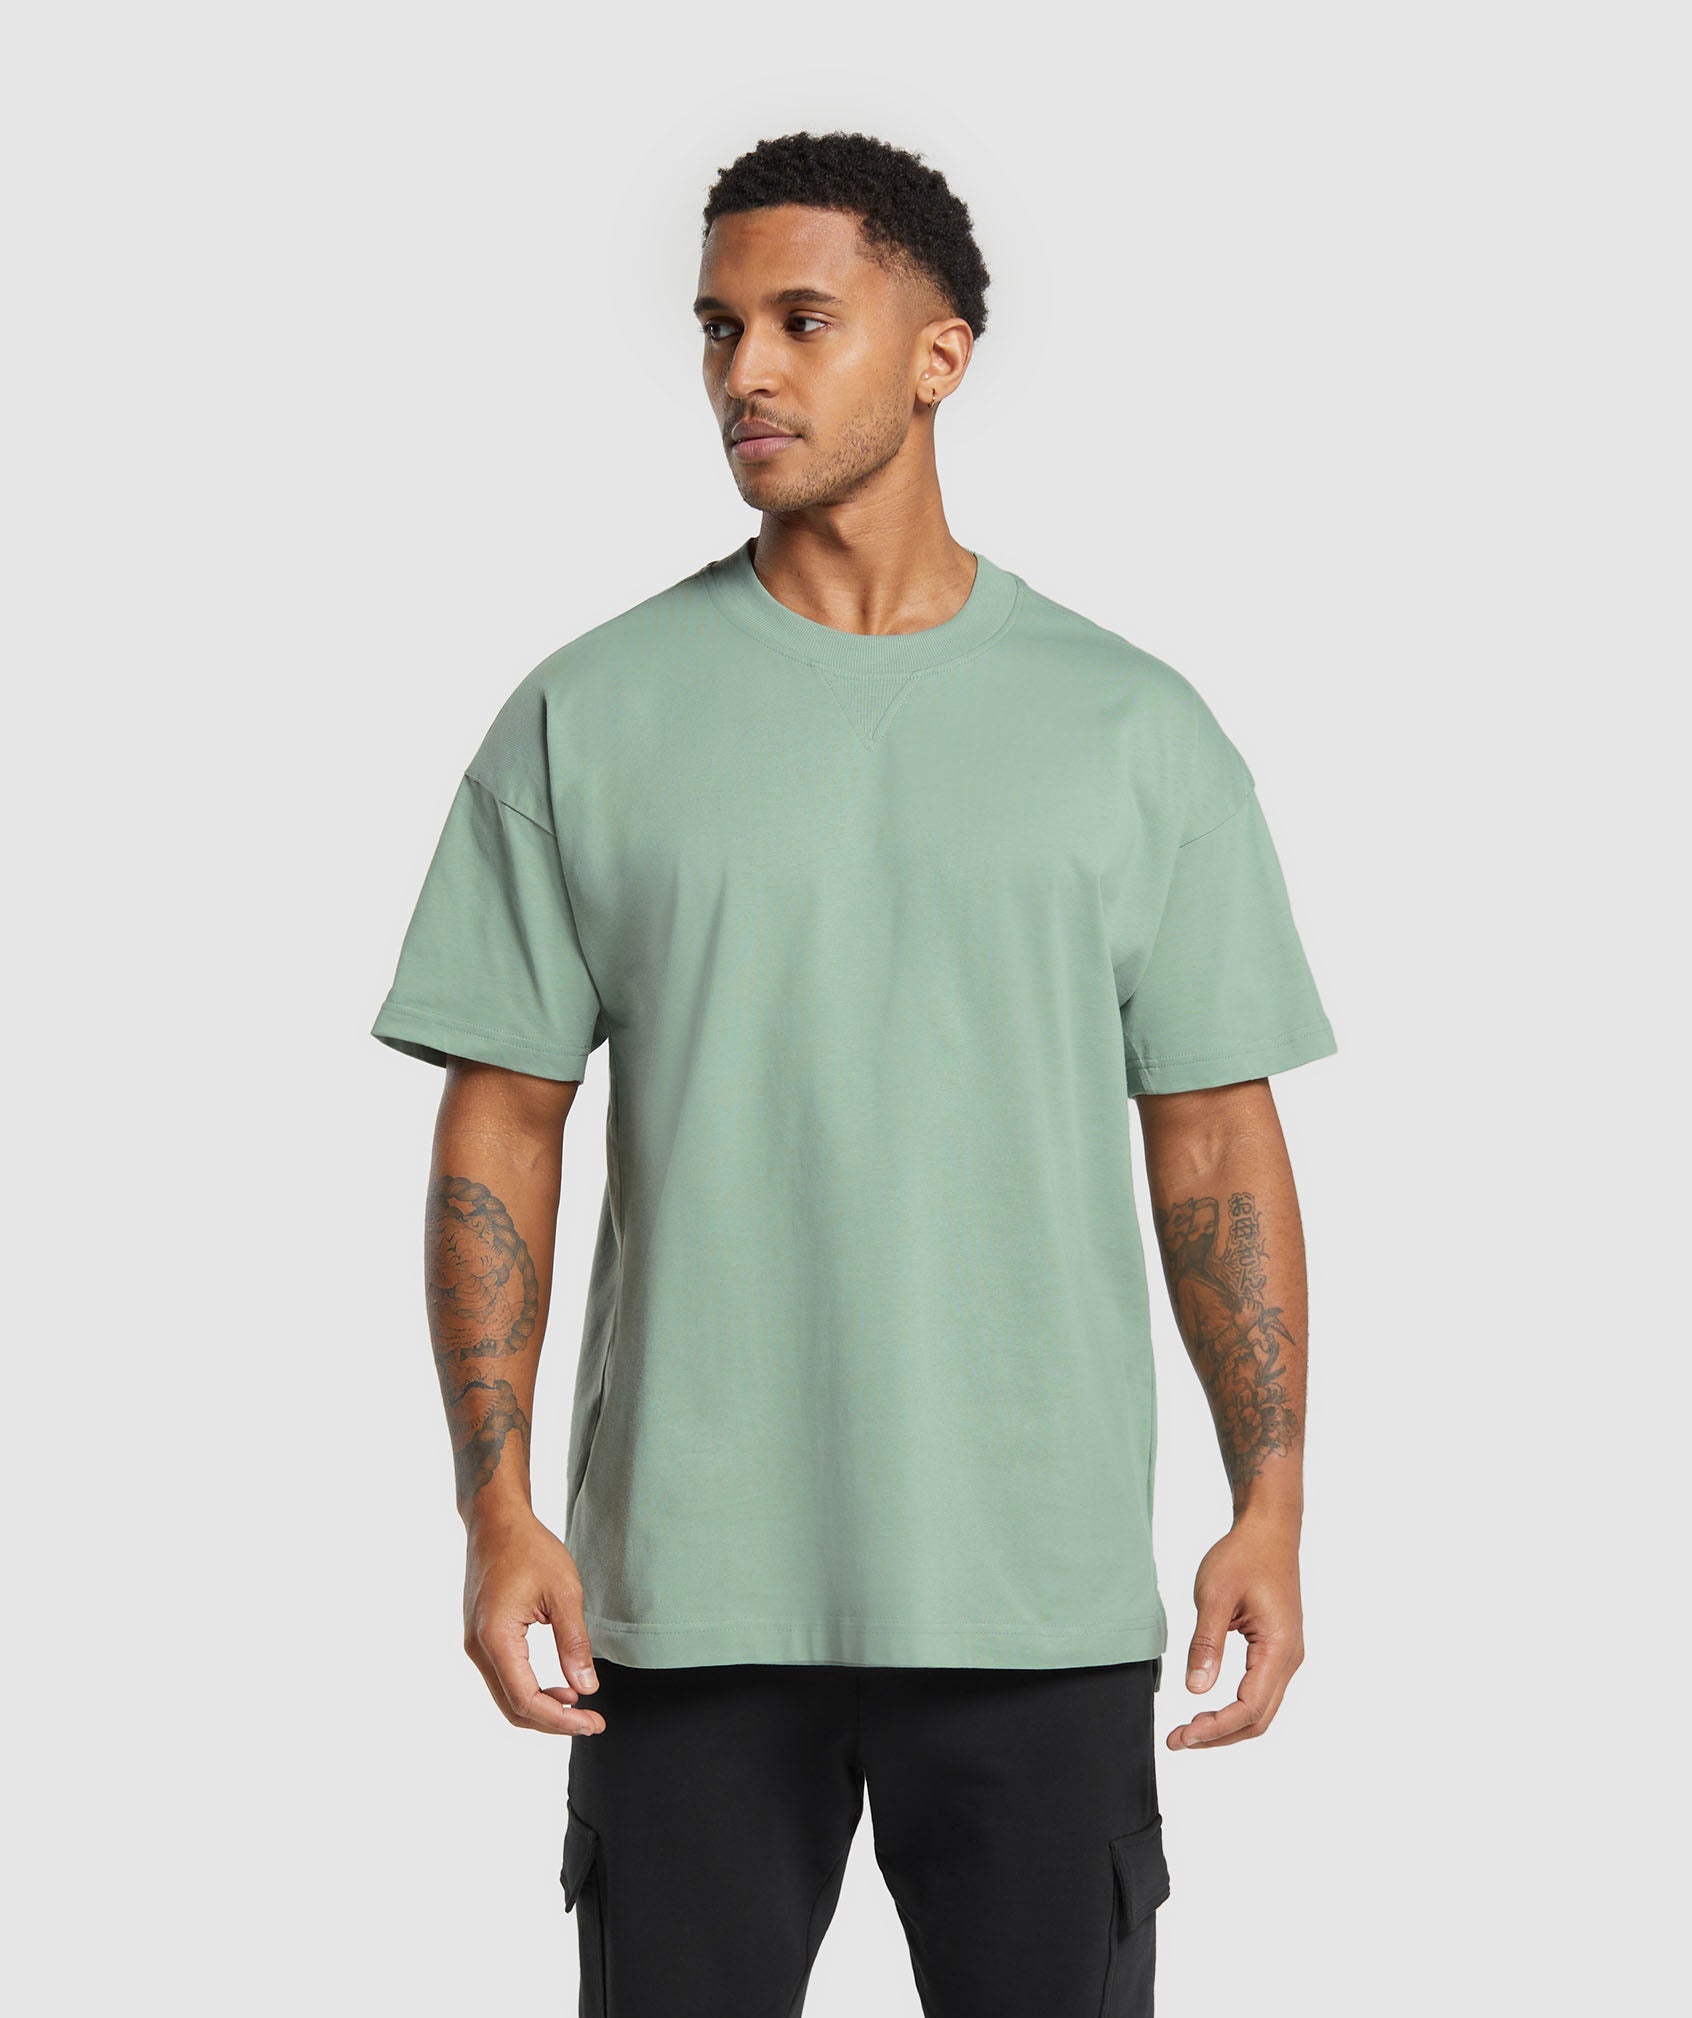 Rest Day Essentials T-Shirt in {{variantColor} is out of stock